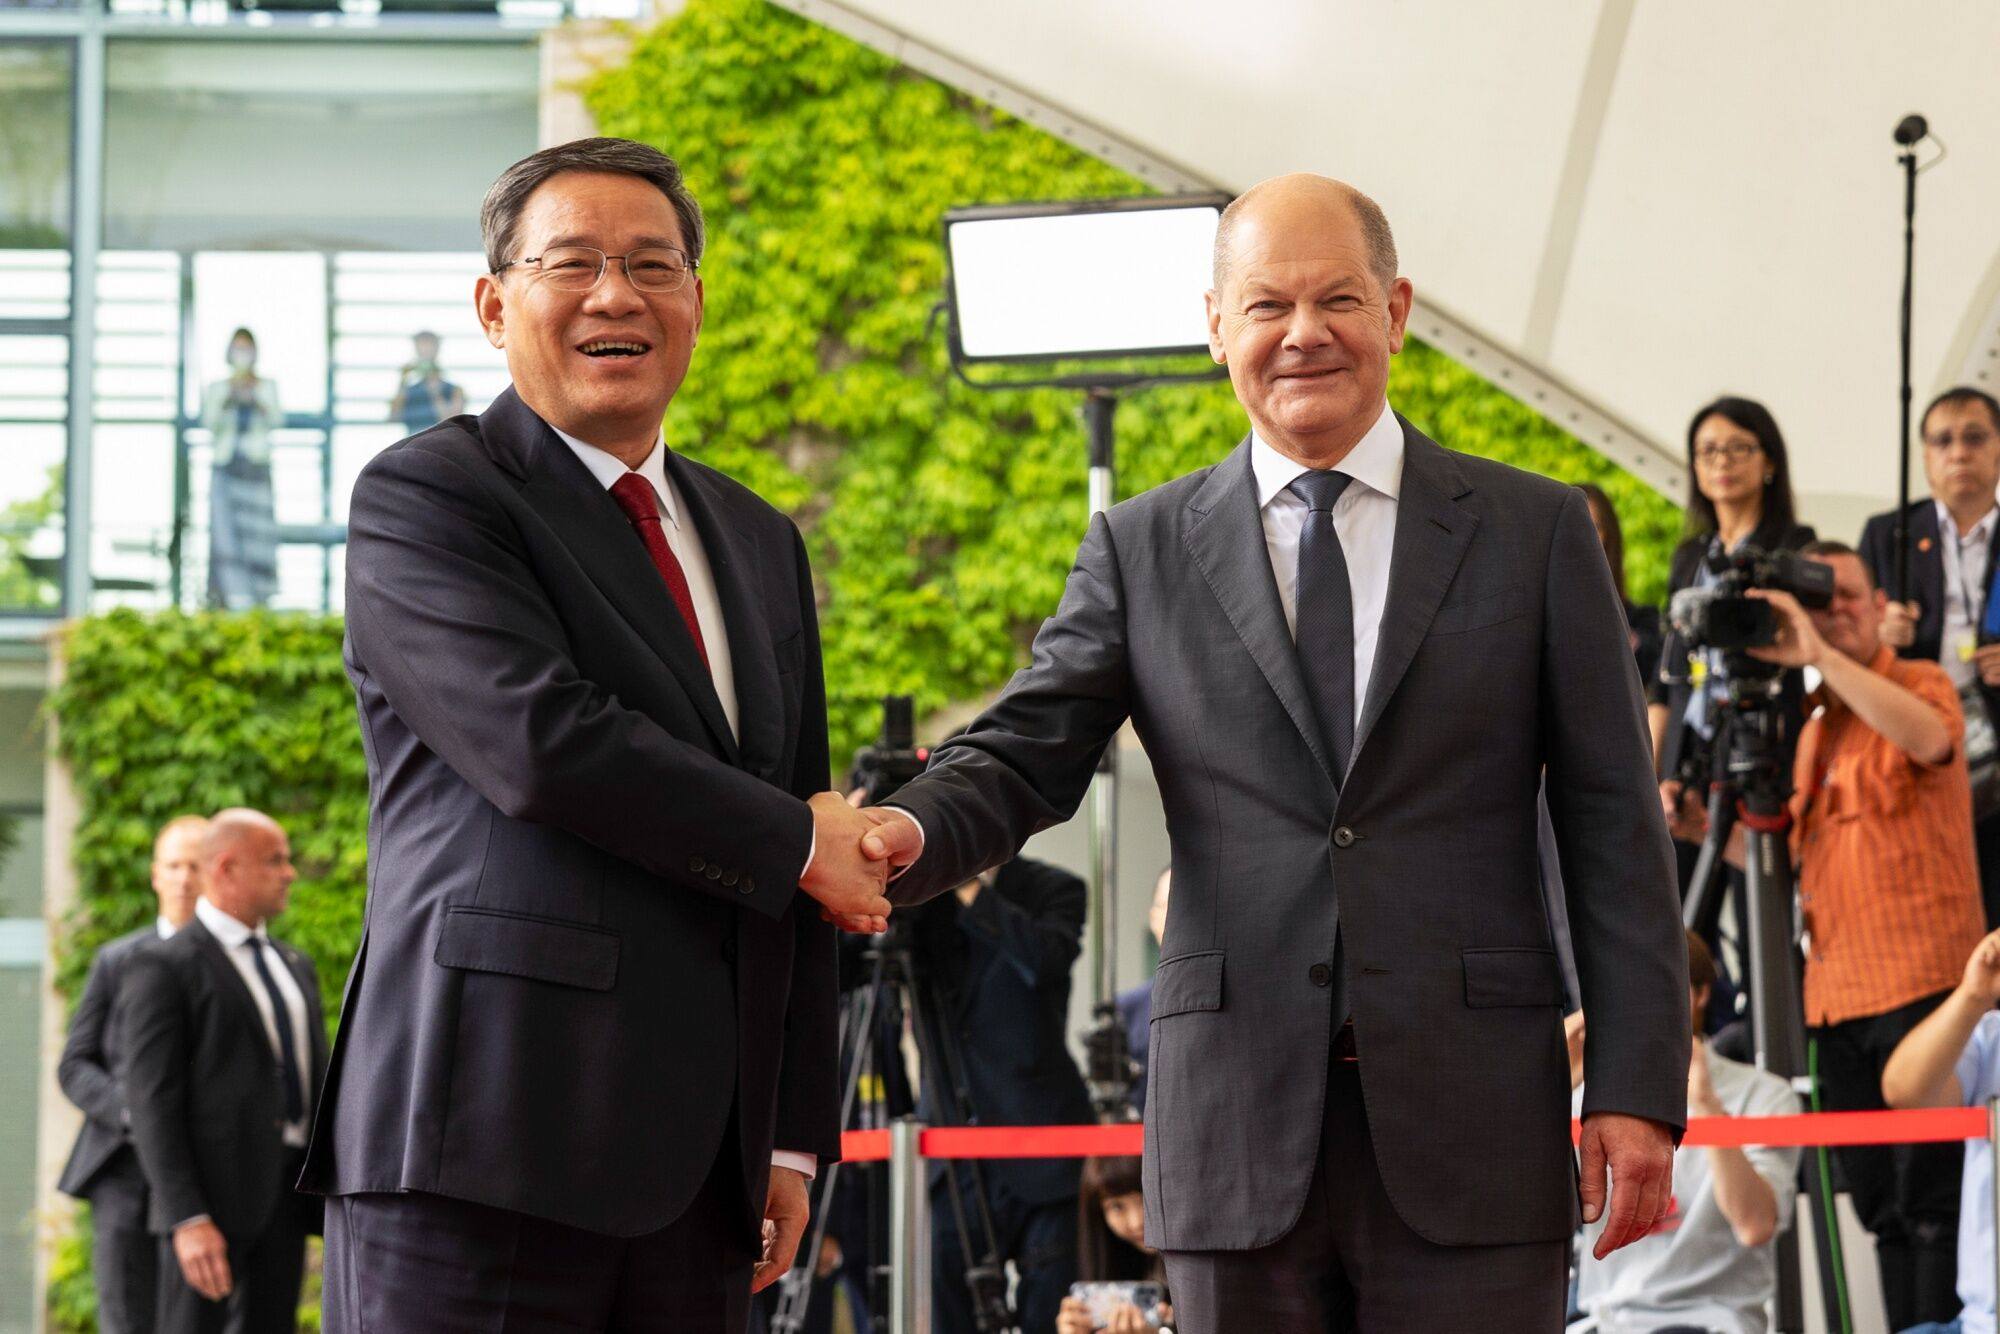 German Chancellor Olaf Scholz (right) shakes hands with Chinese Premier Li Qiang during their meeting in Berlin on Tuesday. Li chose Germany as the first stop of his inaugural overseas trip as premier. Photo: Bloomberg